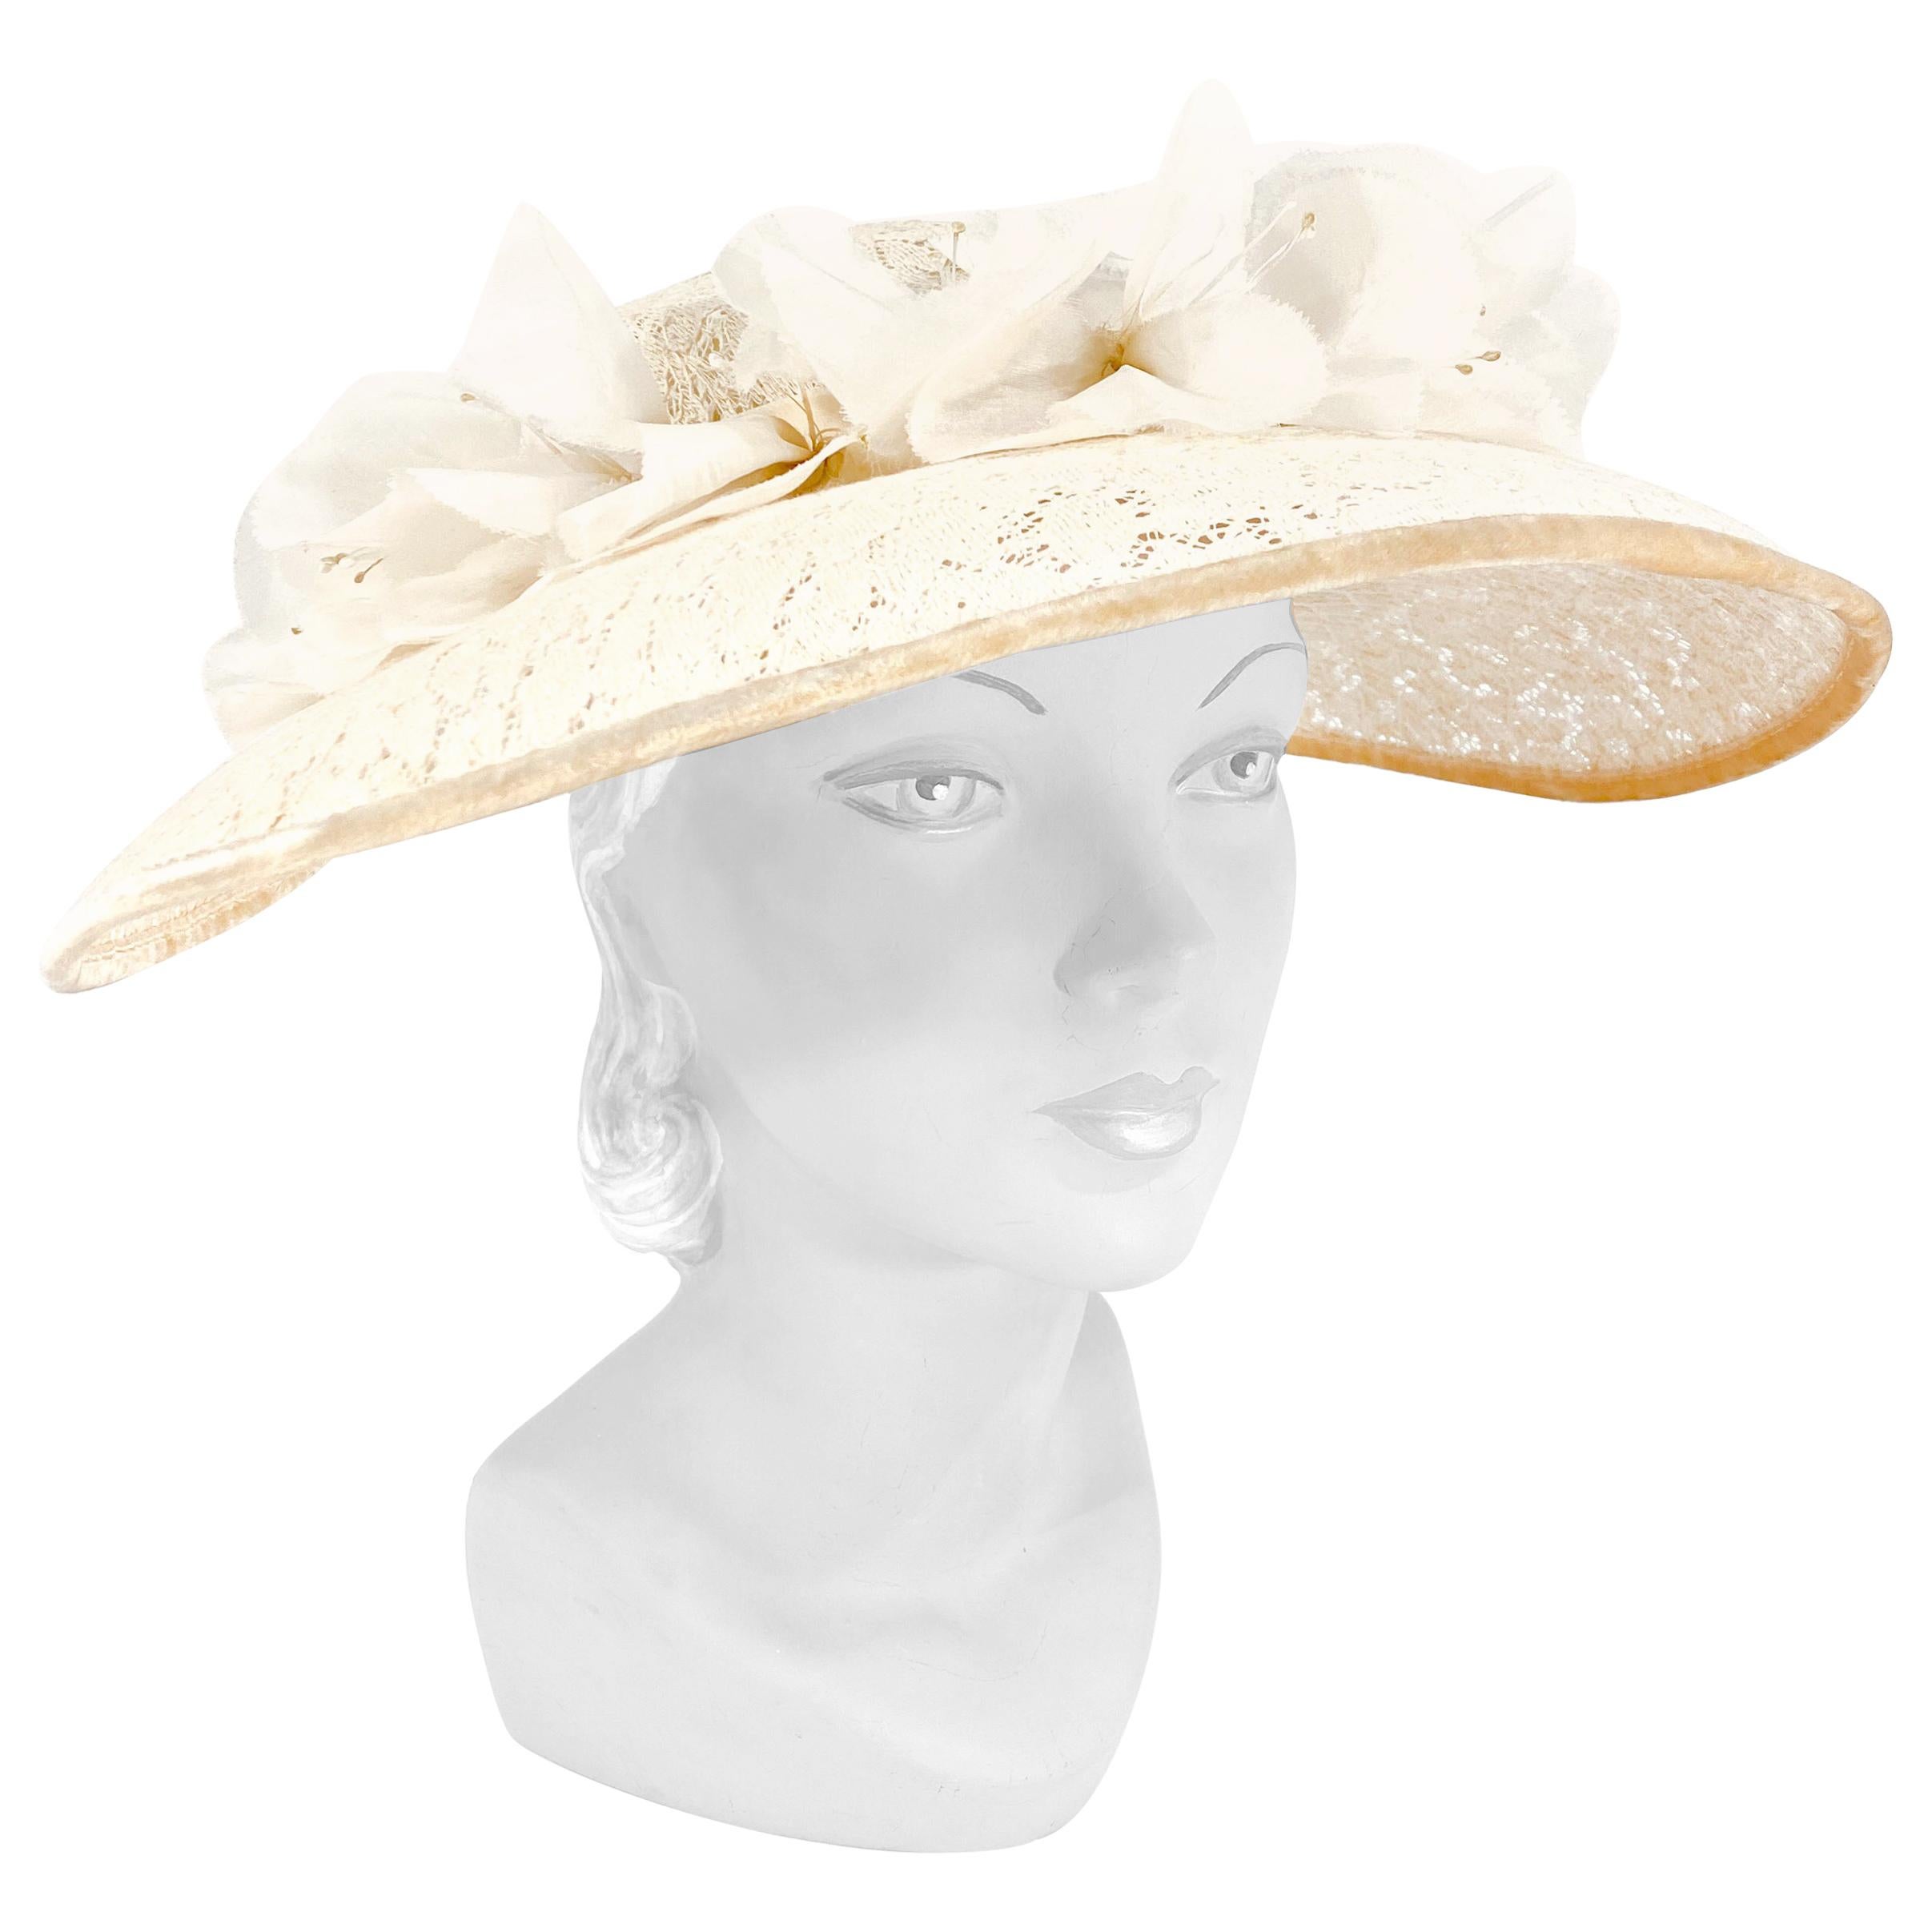 Women's Vintage Straw Hat with Cream Flowers and Brown Velvet Ribbon and Small Hat Pin